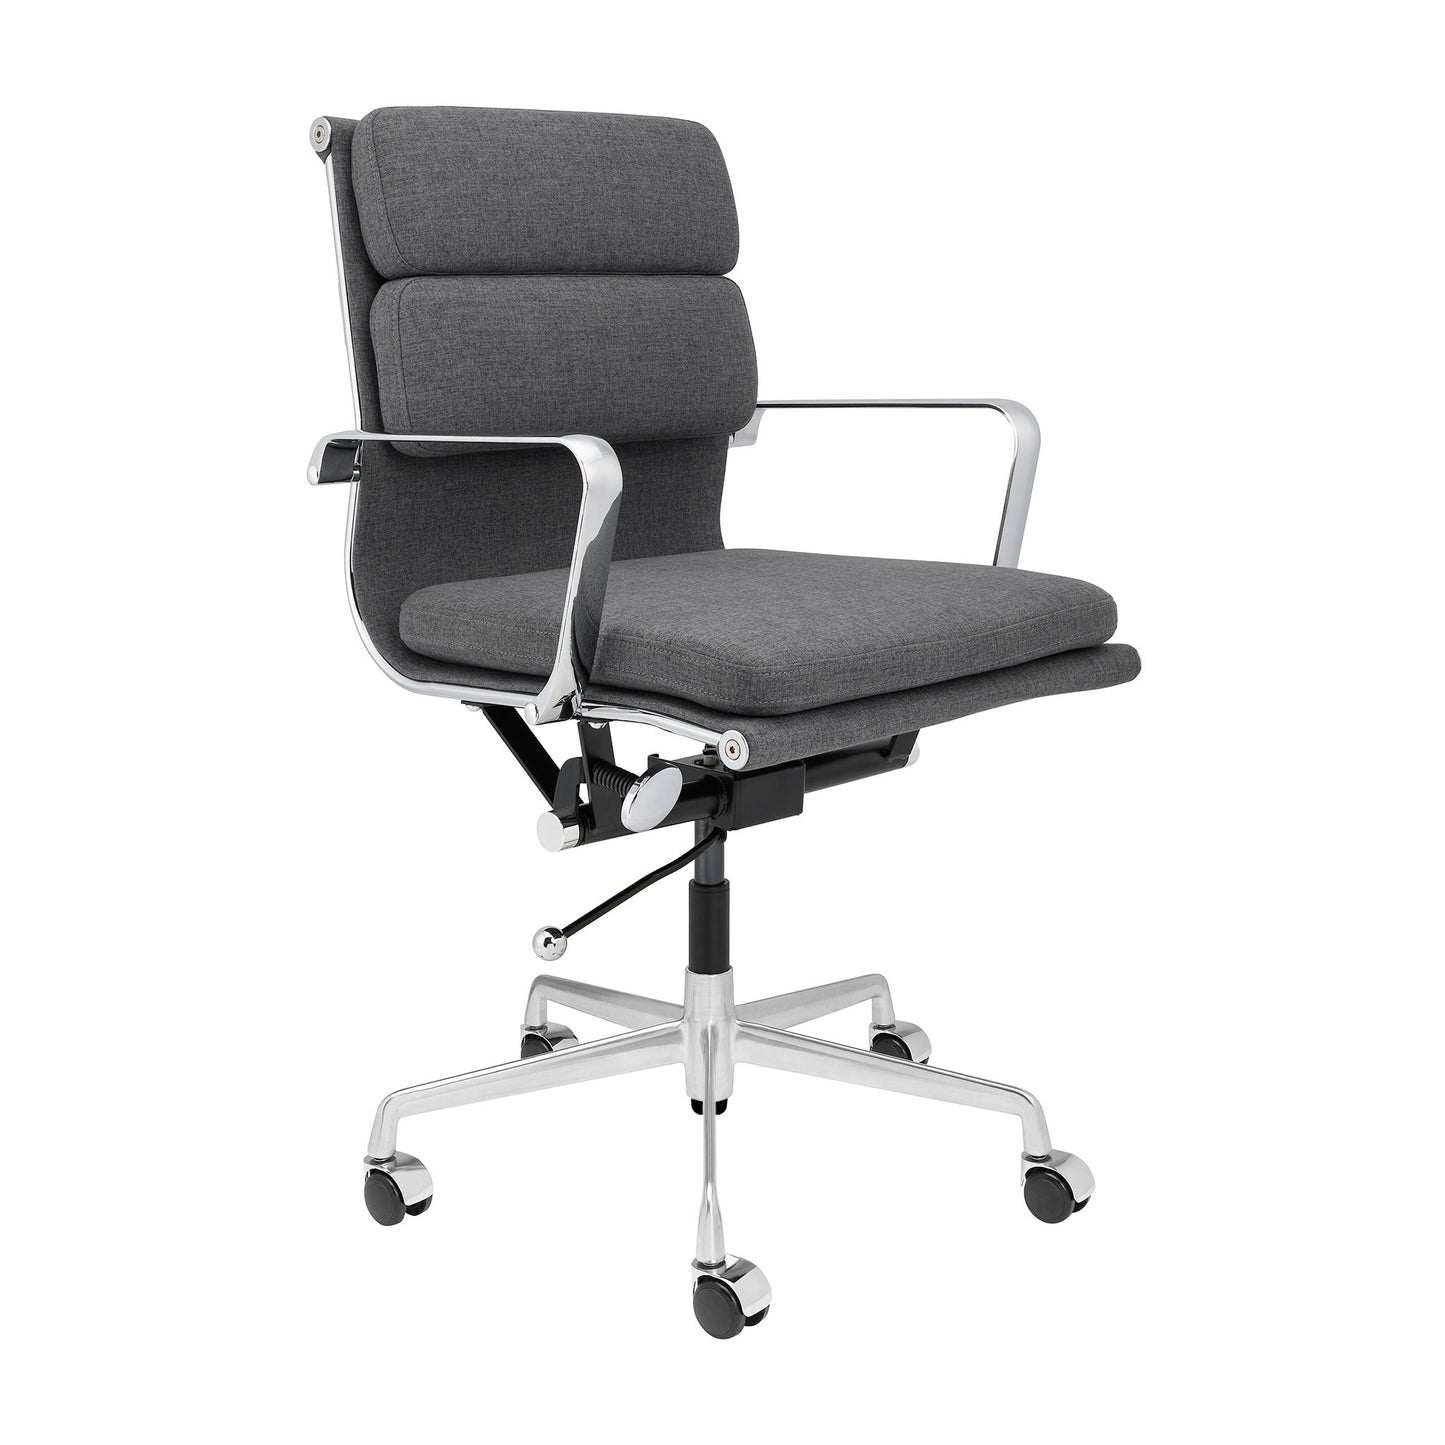 Classic SOHO Soft Padded Management Chair (Charcoal Fabric)